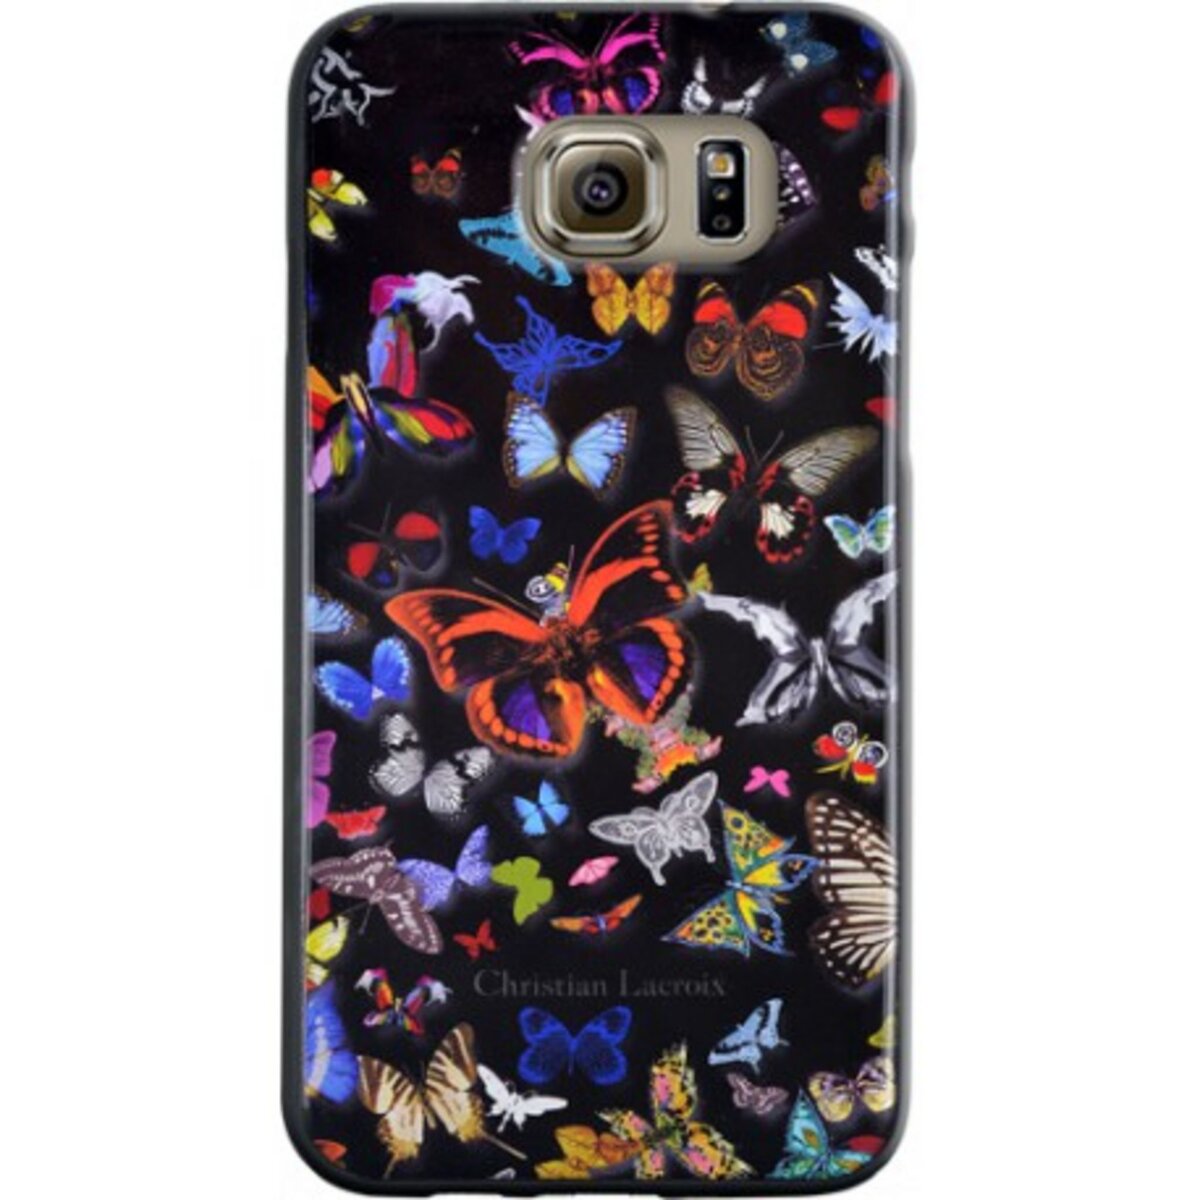 CHRISTIAN LACROIX Coque noir Butterfly Parade Galaxy S6